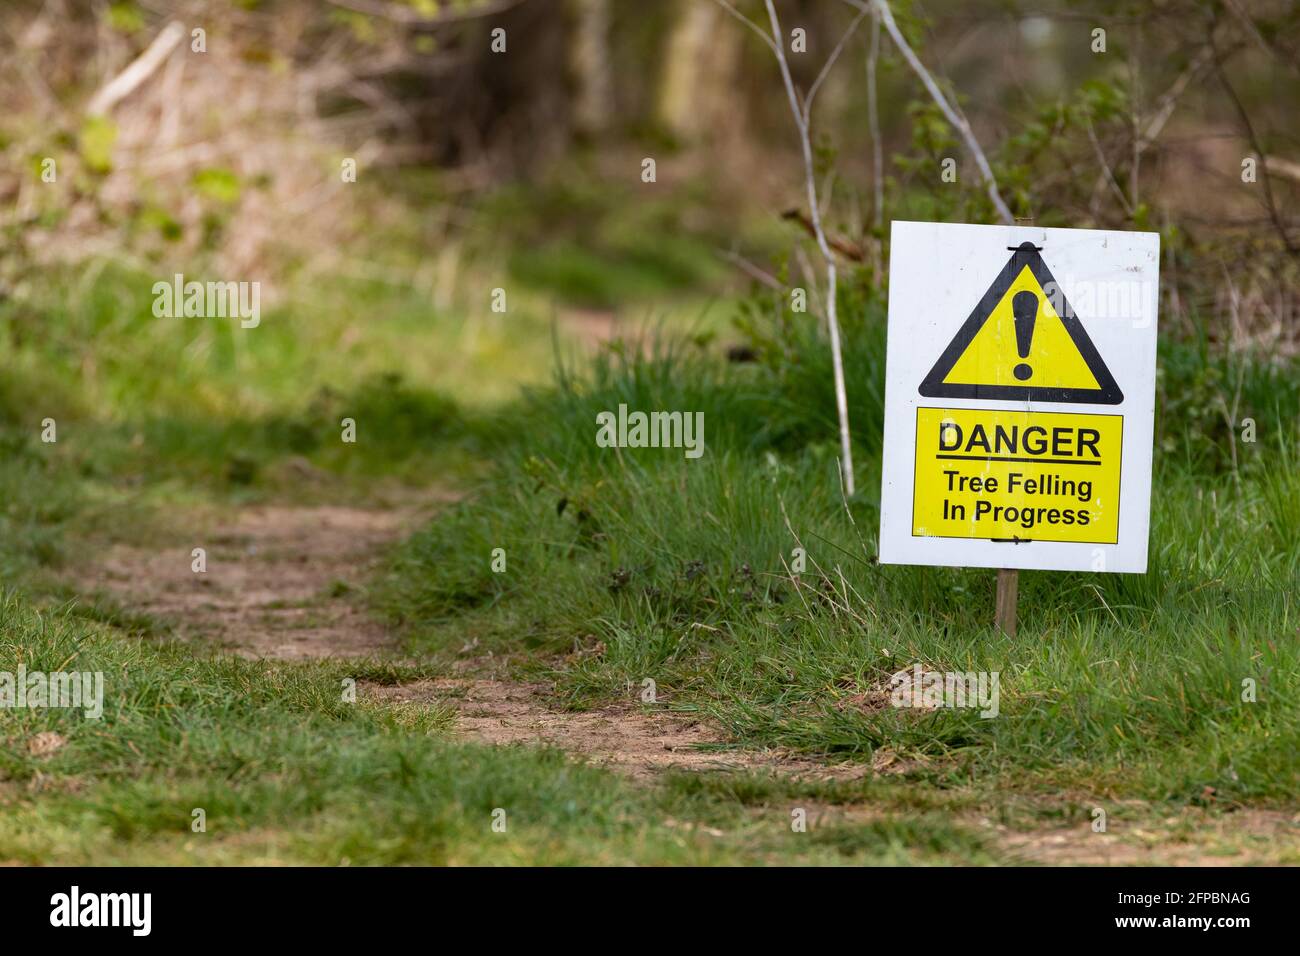 A sign in the countryside warning people of dangerous tree felling in the area Stock Photo